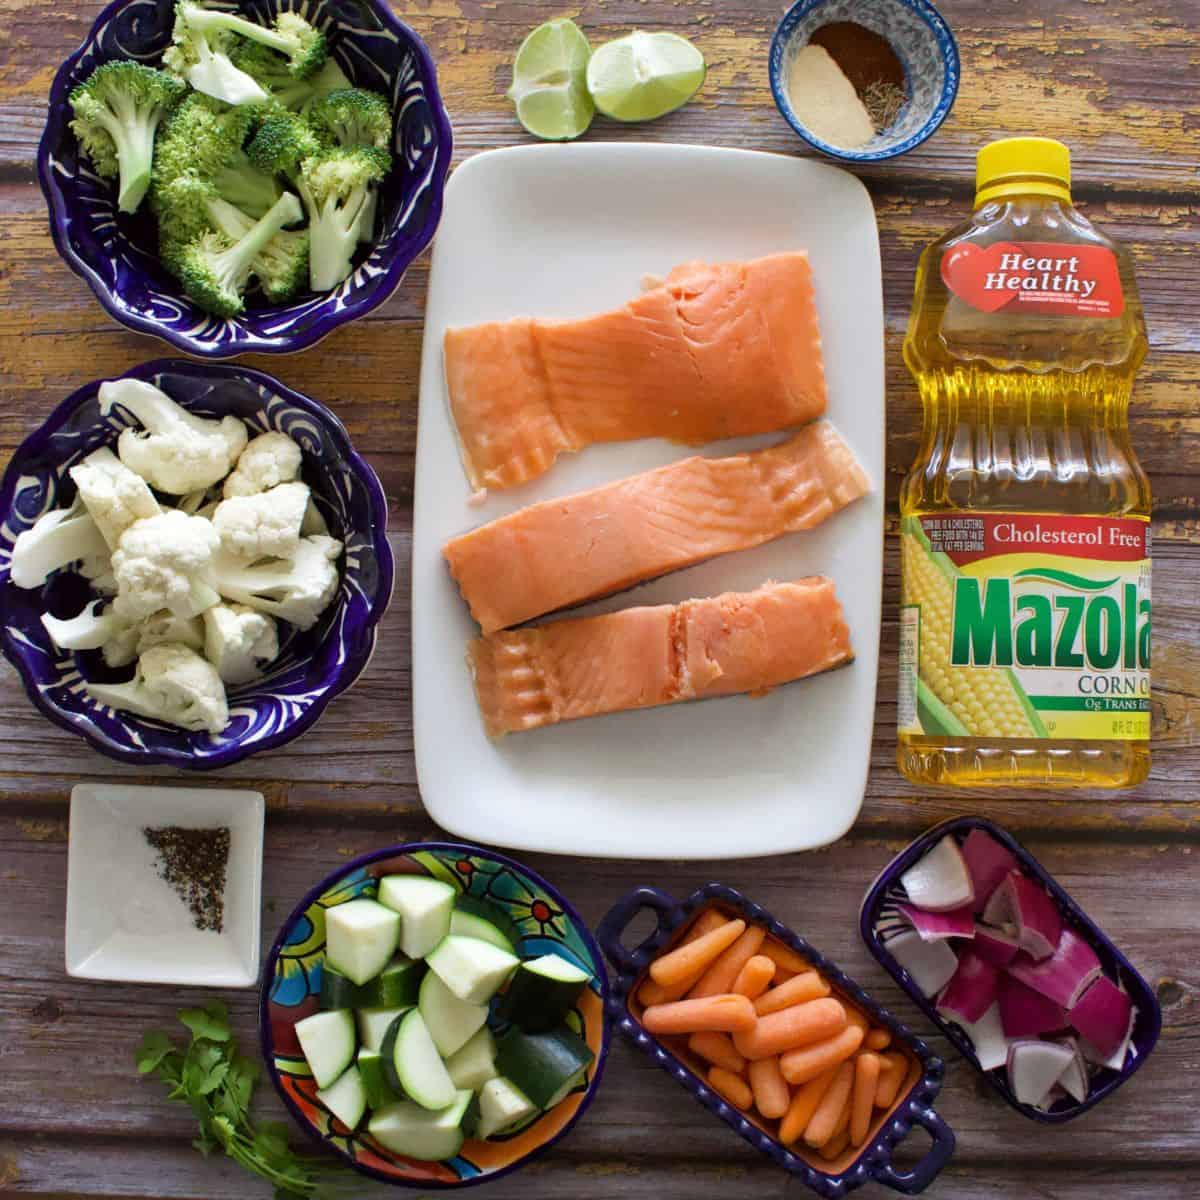 The ingredients needed to make the salmon with vegetables.